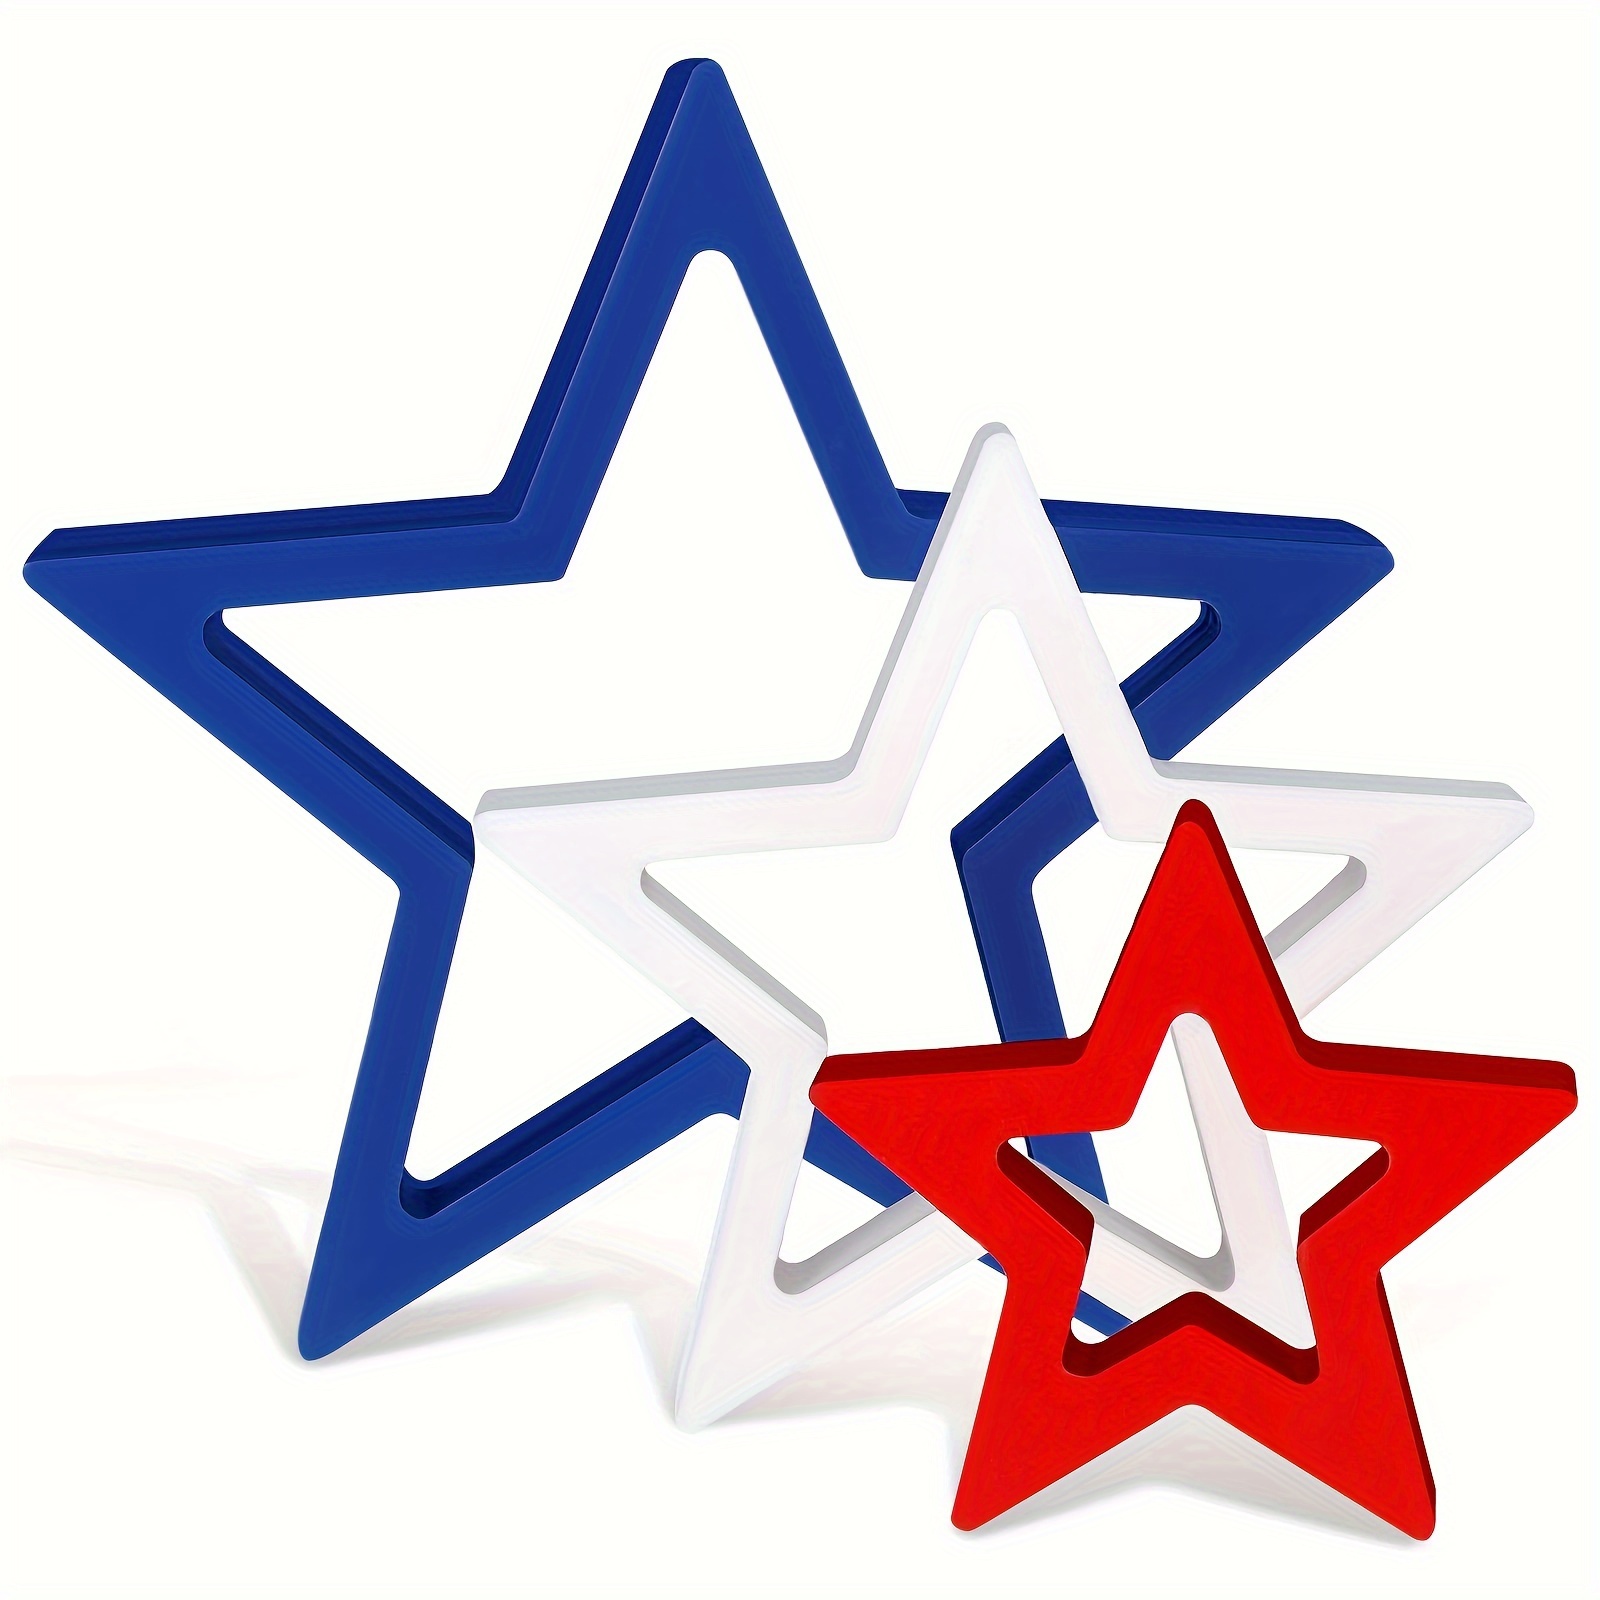 

3pcs Patriotic Decoration Wooden Star Sign Memorial Day Table Decor 4th Of July Centerpiece Star Independence Day Tiered Tray Decor For Table Home (white, Blue, Red)